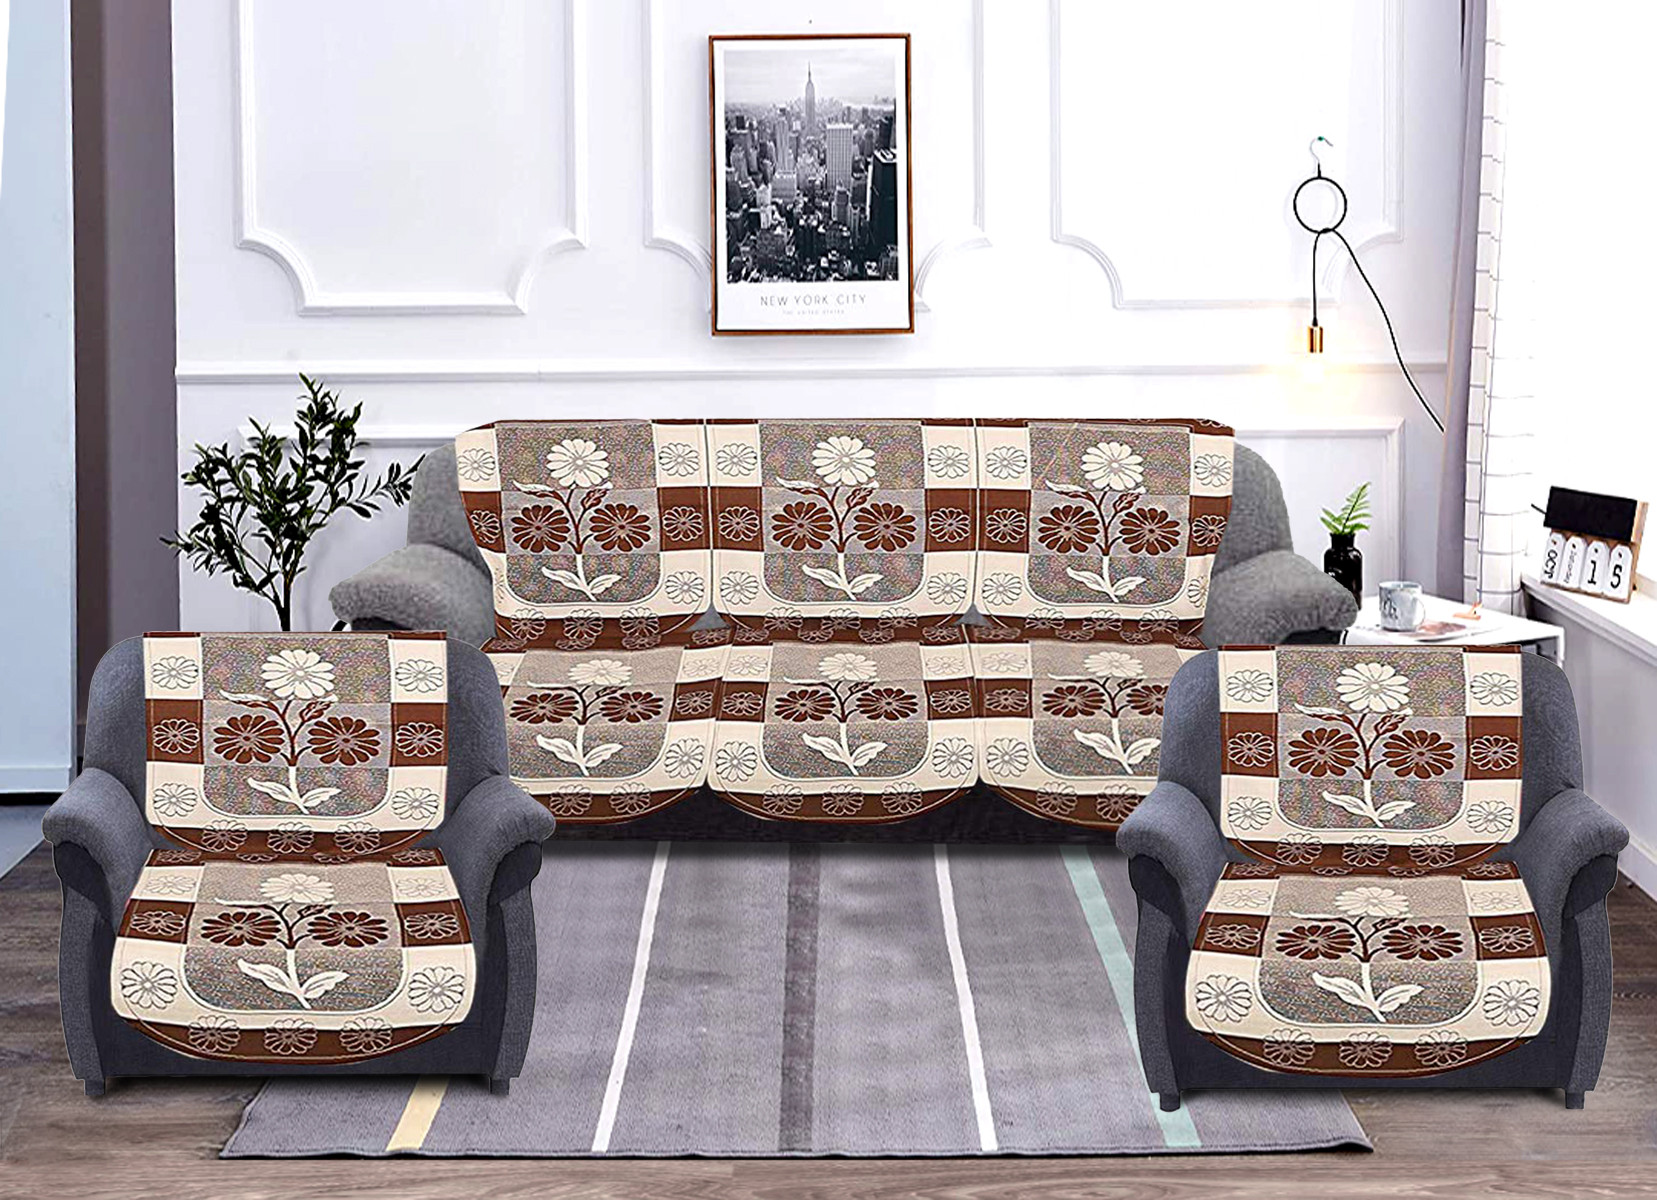 Kuber Industries Flower Print Cotton 6 Piece 5 Seater Slip Cover/Sofa Cover Set,Brown